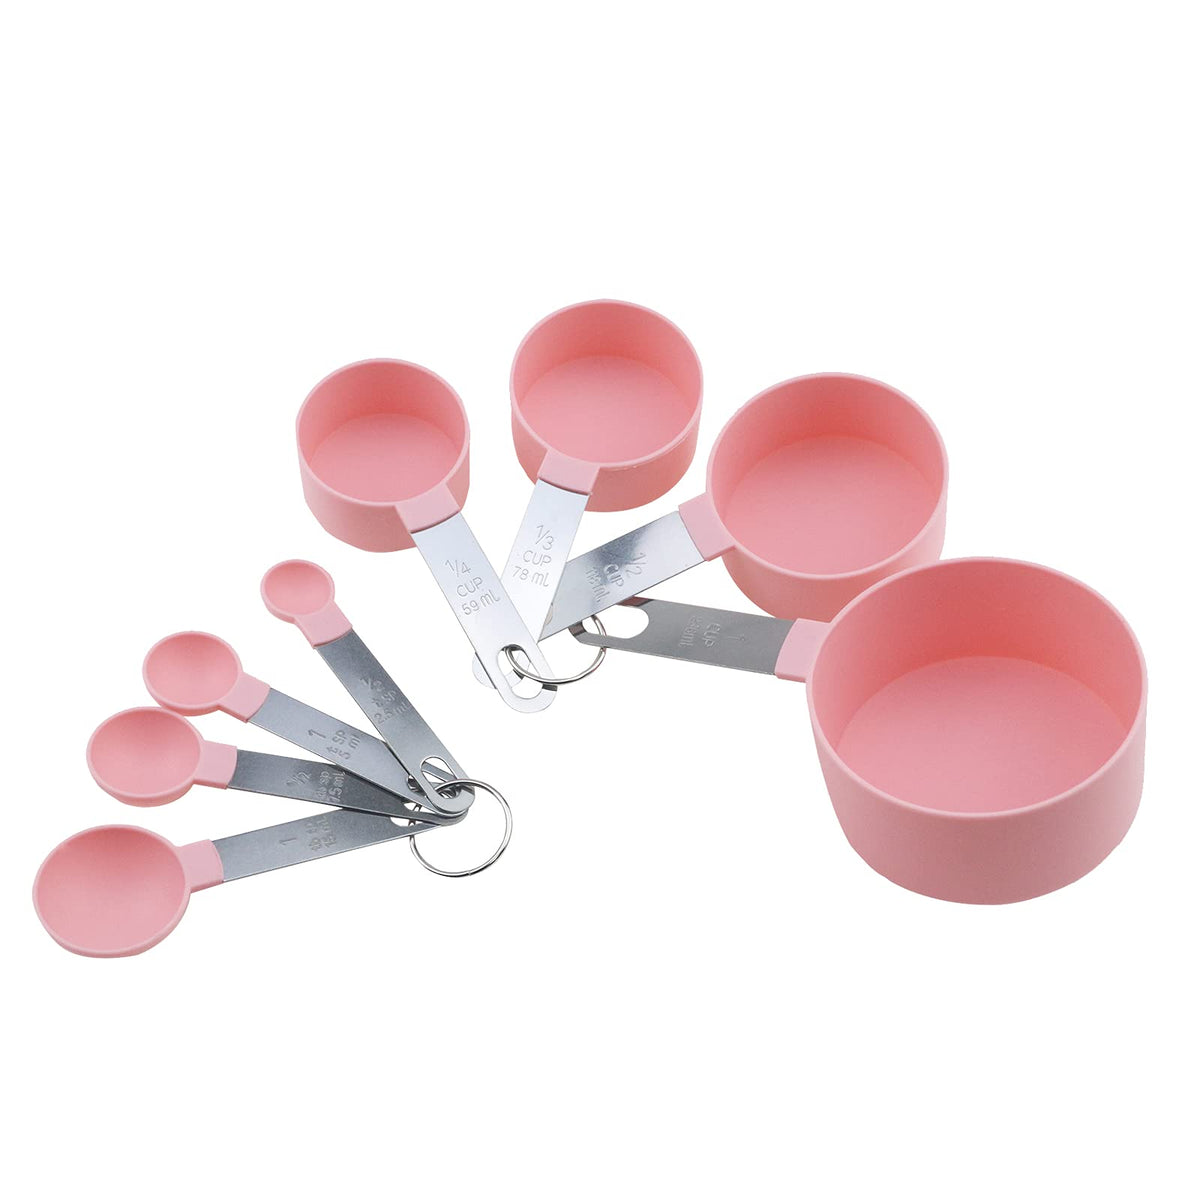 CWC Cook With Color 8pc Measuring Spoons/Cups Red Stainless Steel NEW